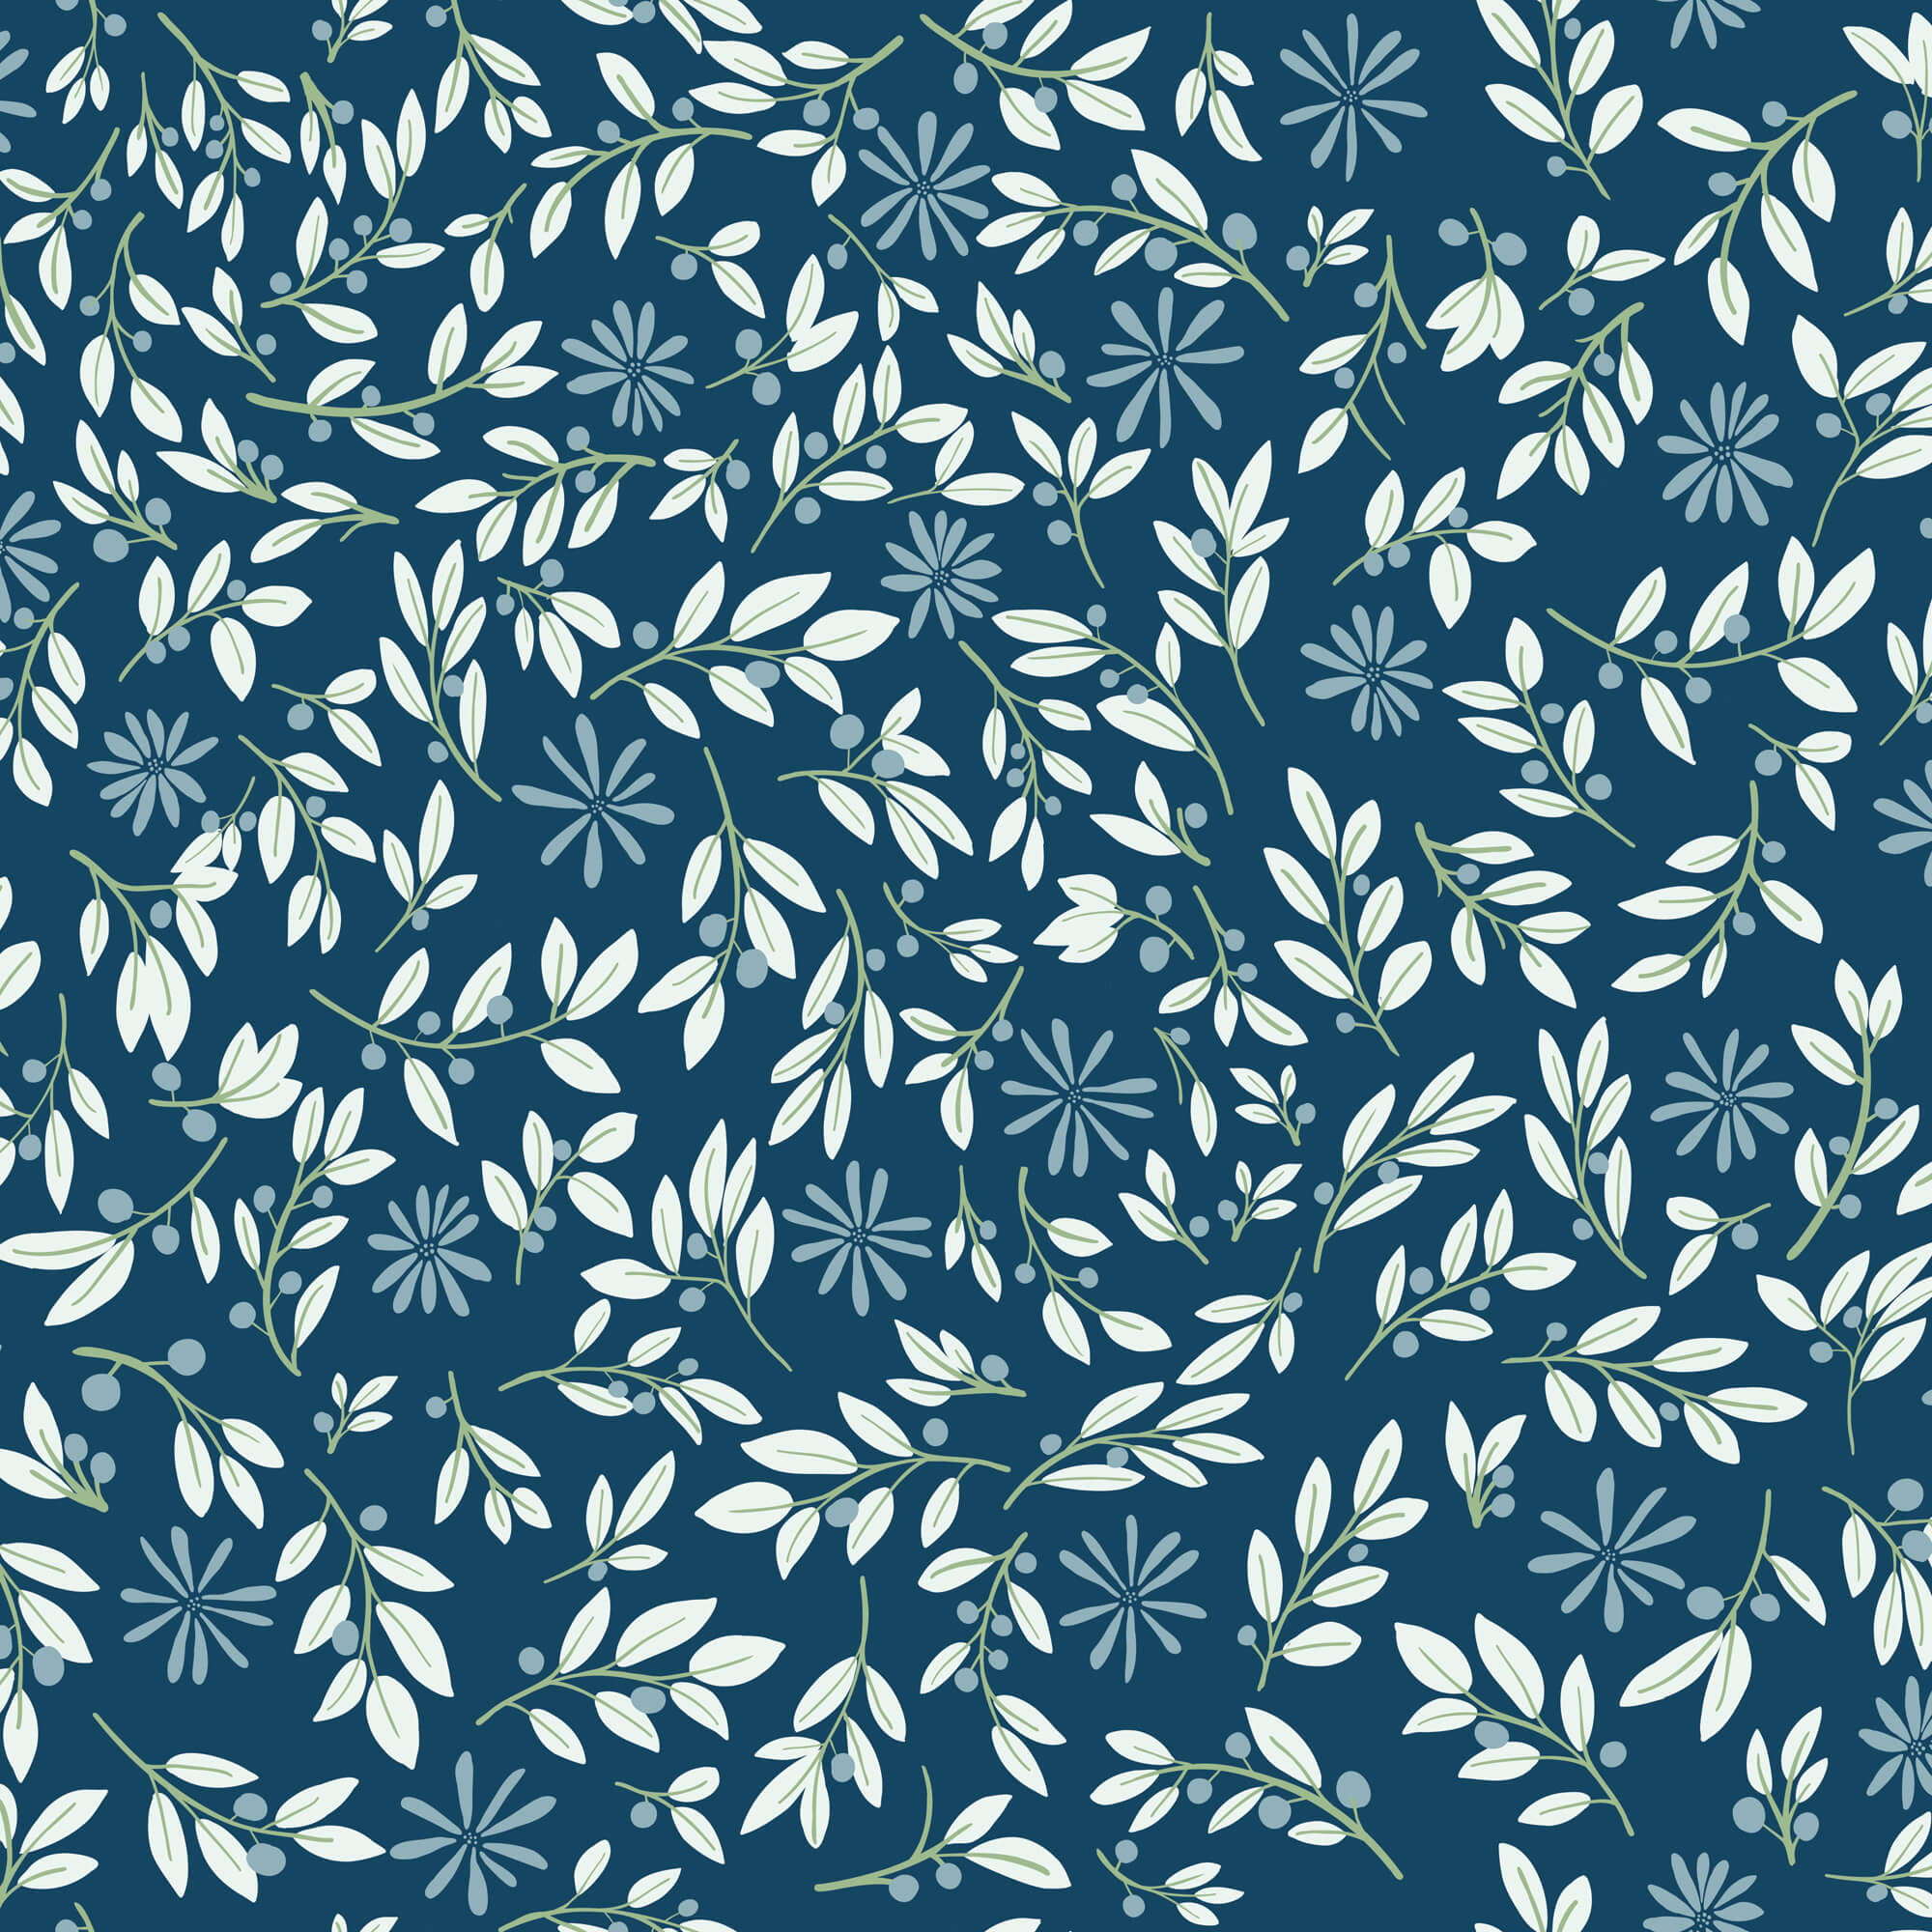 Maine Cottage Branch Out: Peacock Fabric By The Yard | Maine Cottage® 